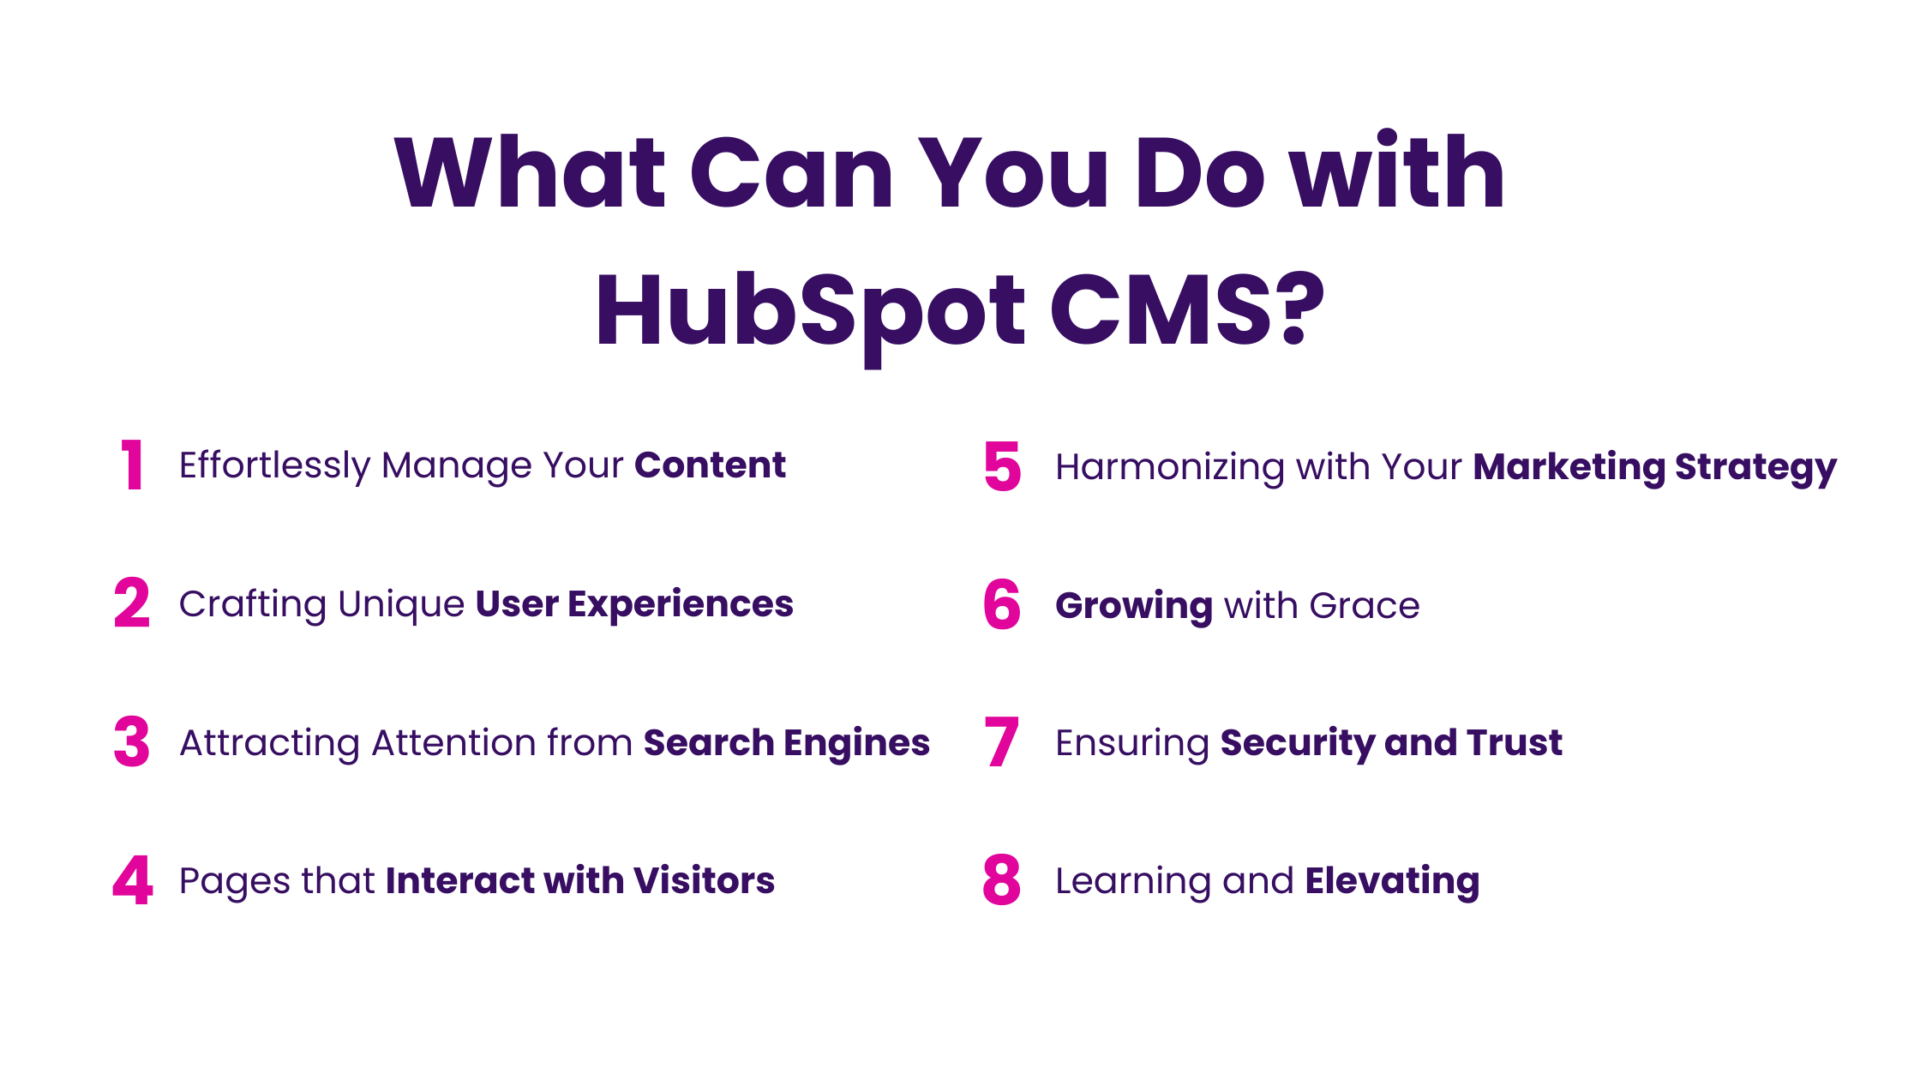 What Can You Do with HubSpot CMS